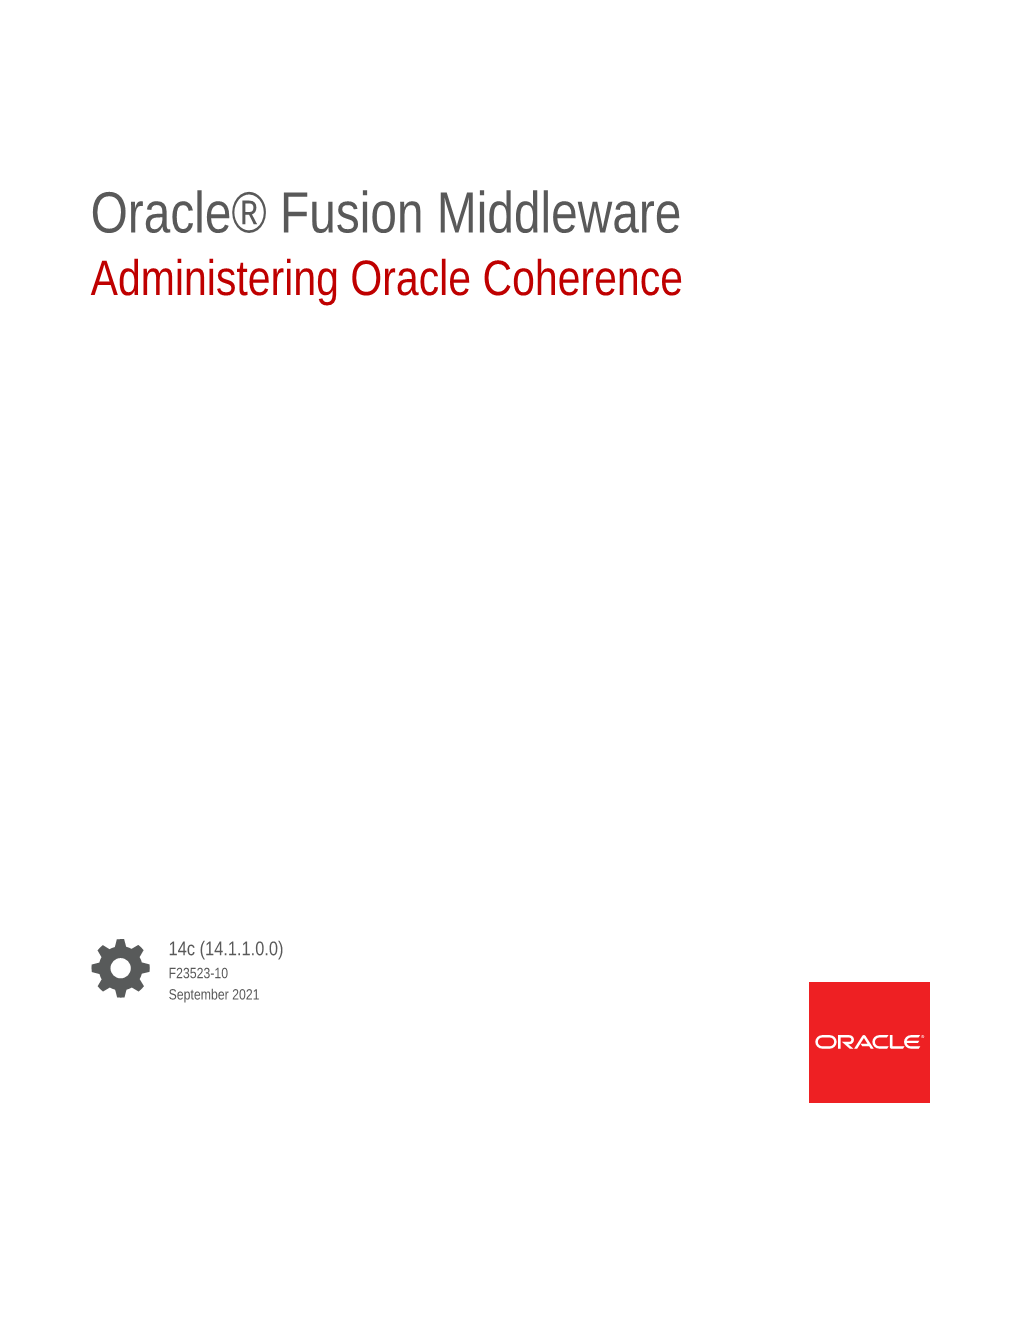 Administering-Oracle-Coherence.Pdf